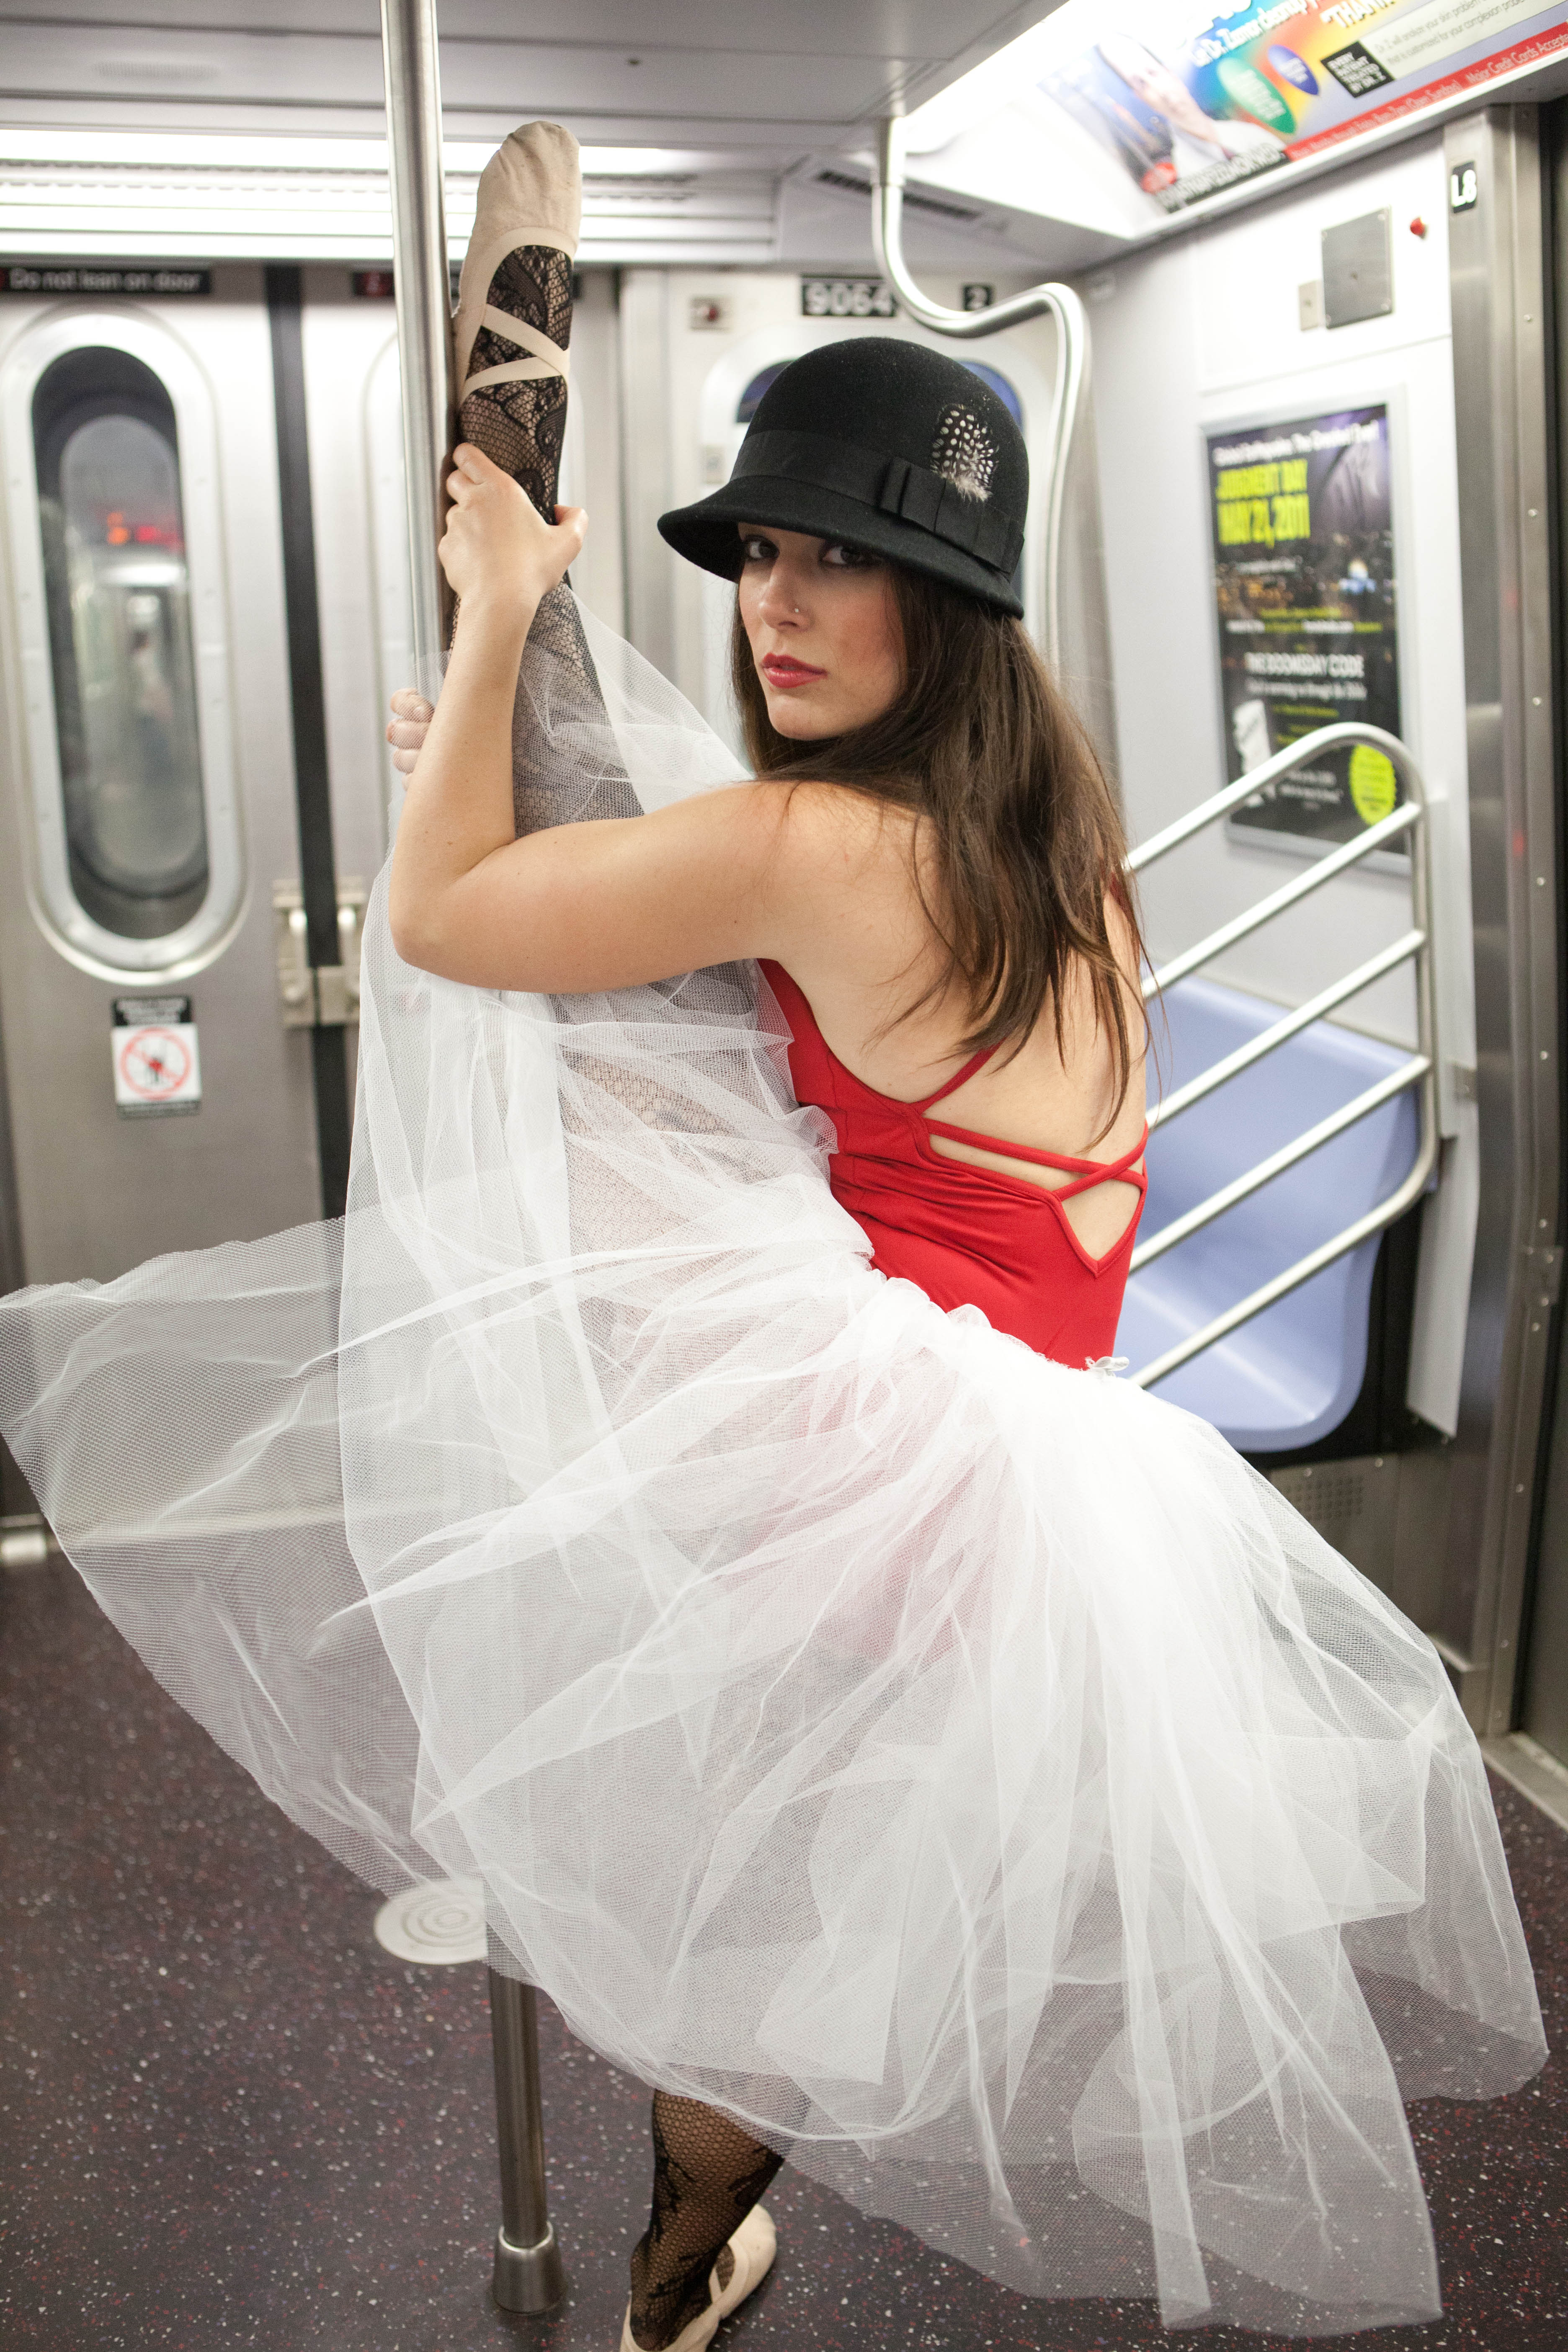 Dancing in the NY subway